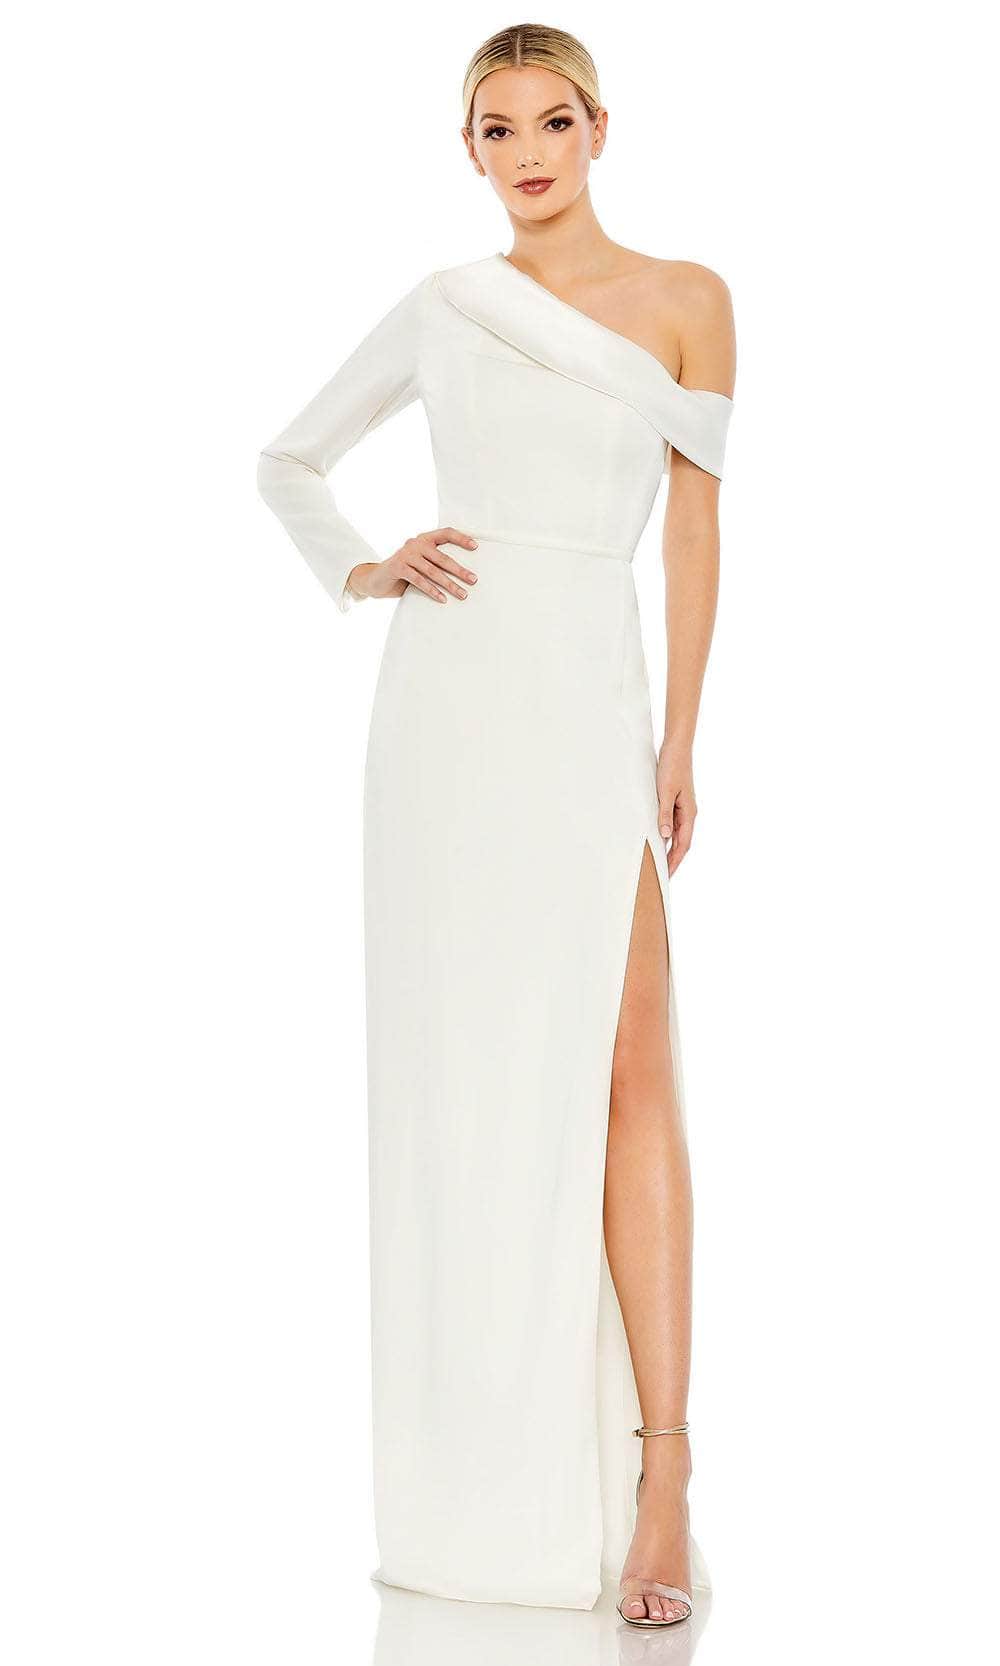 Ieena Duggal 26726 - Asymmetrical Bodice Evening Gown Special Occasion Dress 0 / White